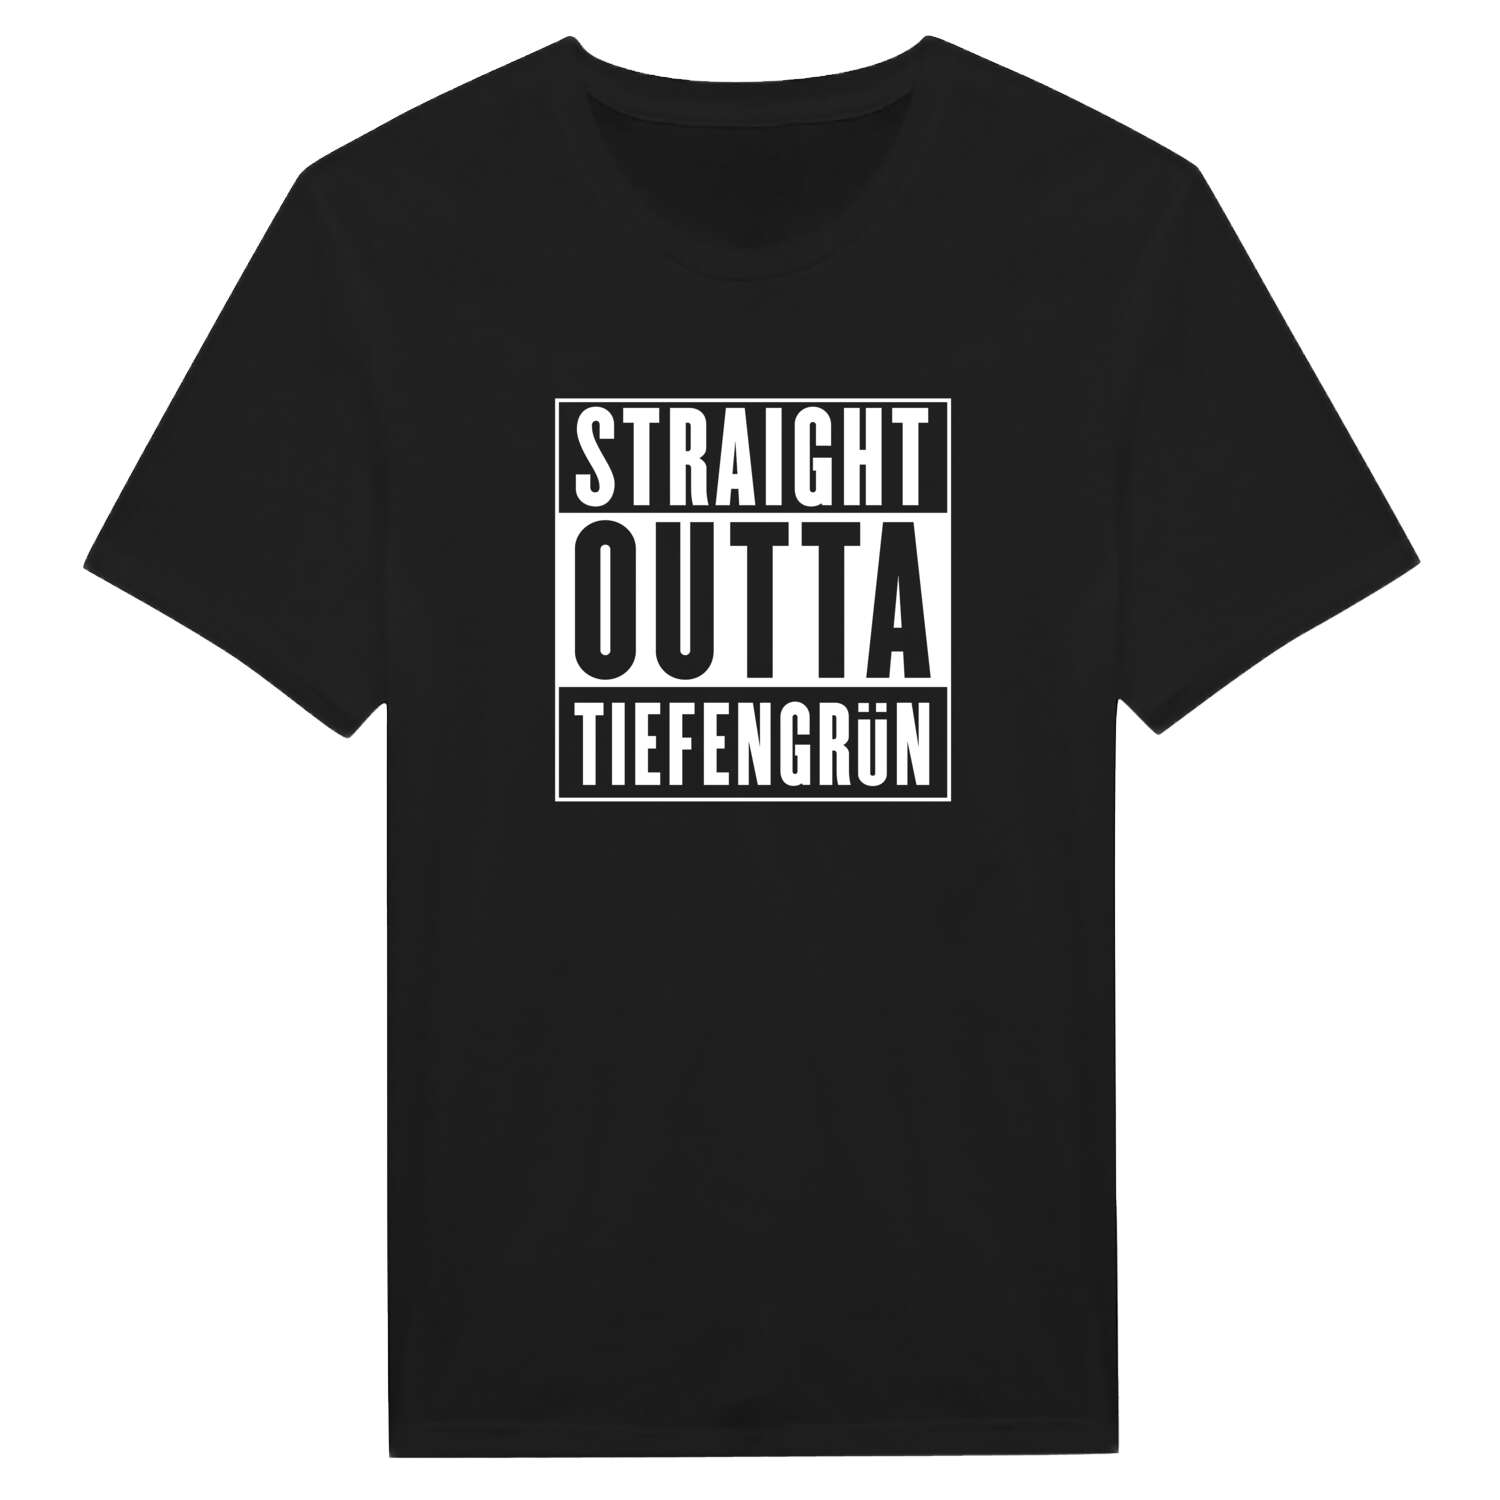 Tiefengrün T-Shirt »Straight Outta«